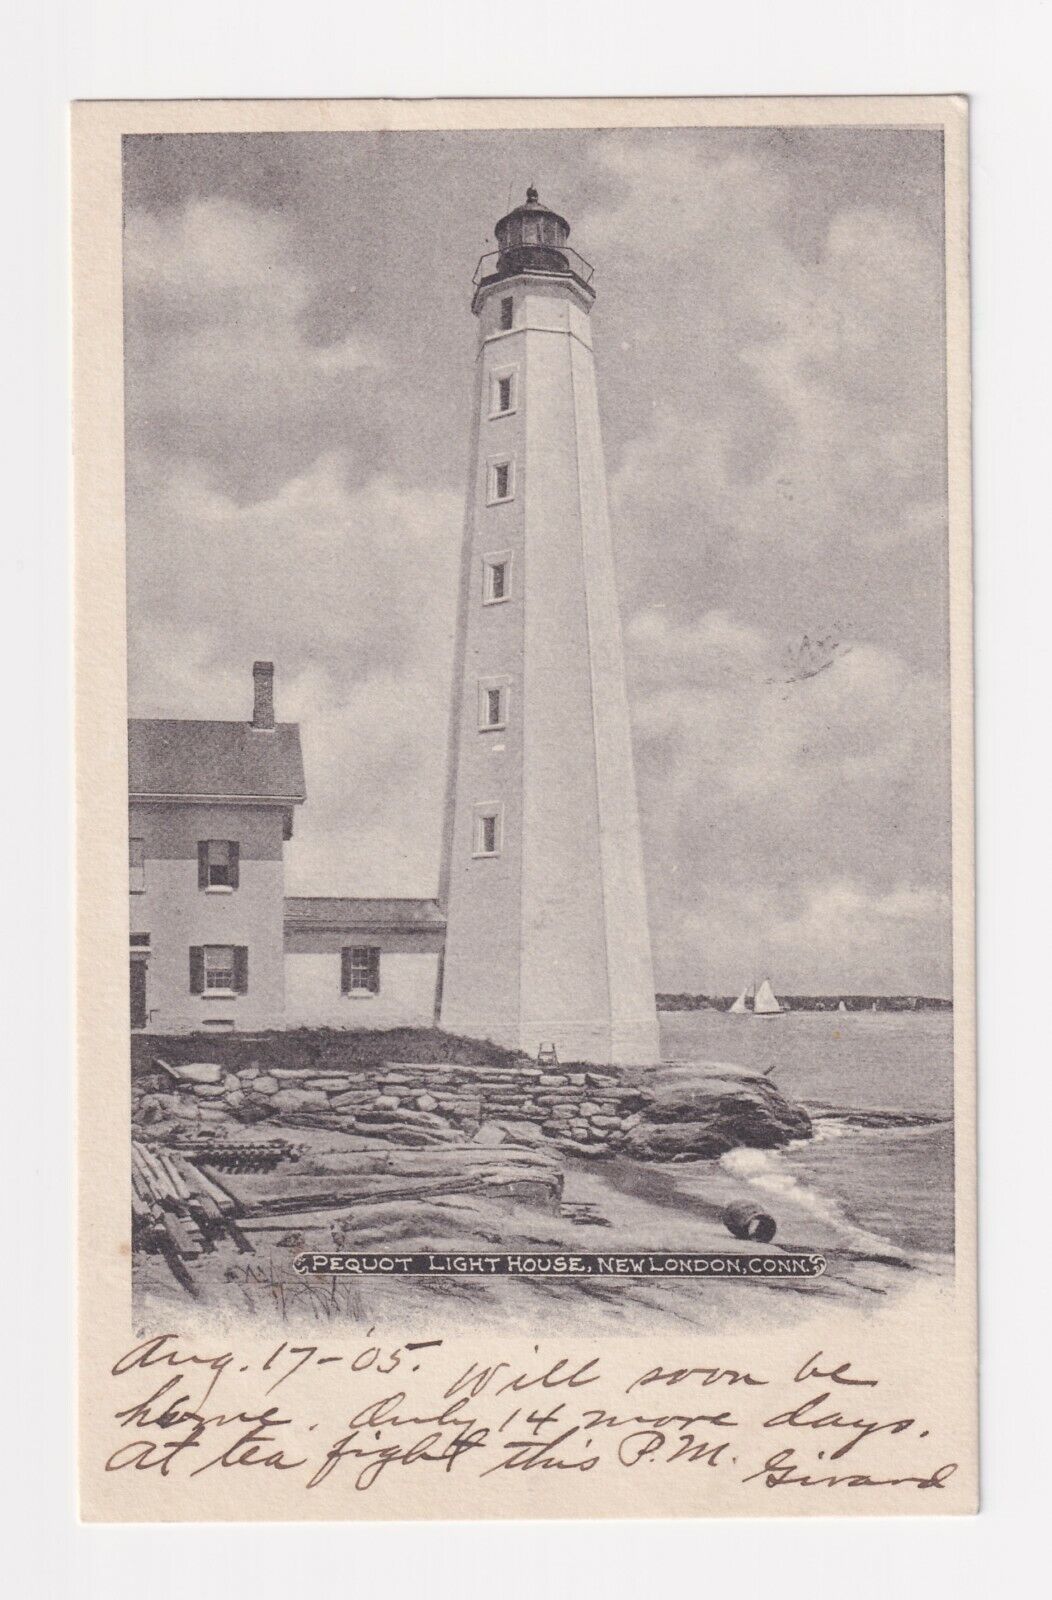 CONNECTICUT PEQUOT LIGHTHOUSE POSTED 1905 TO REBECCA MARTIN, FINDLAY, OHIO